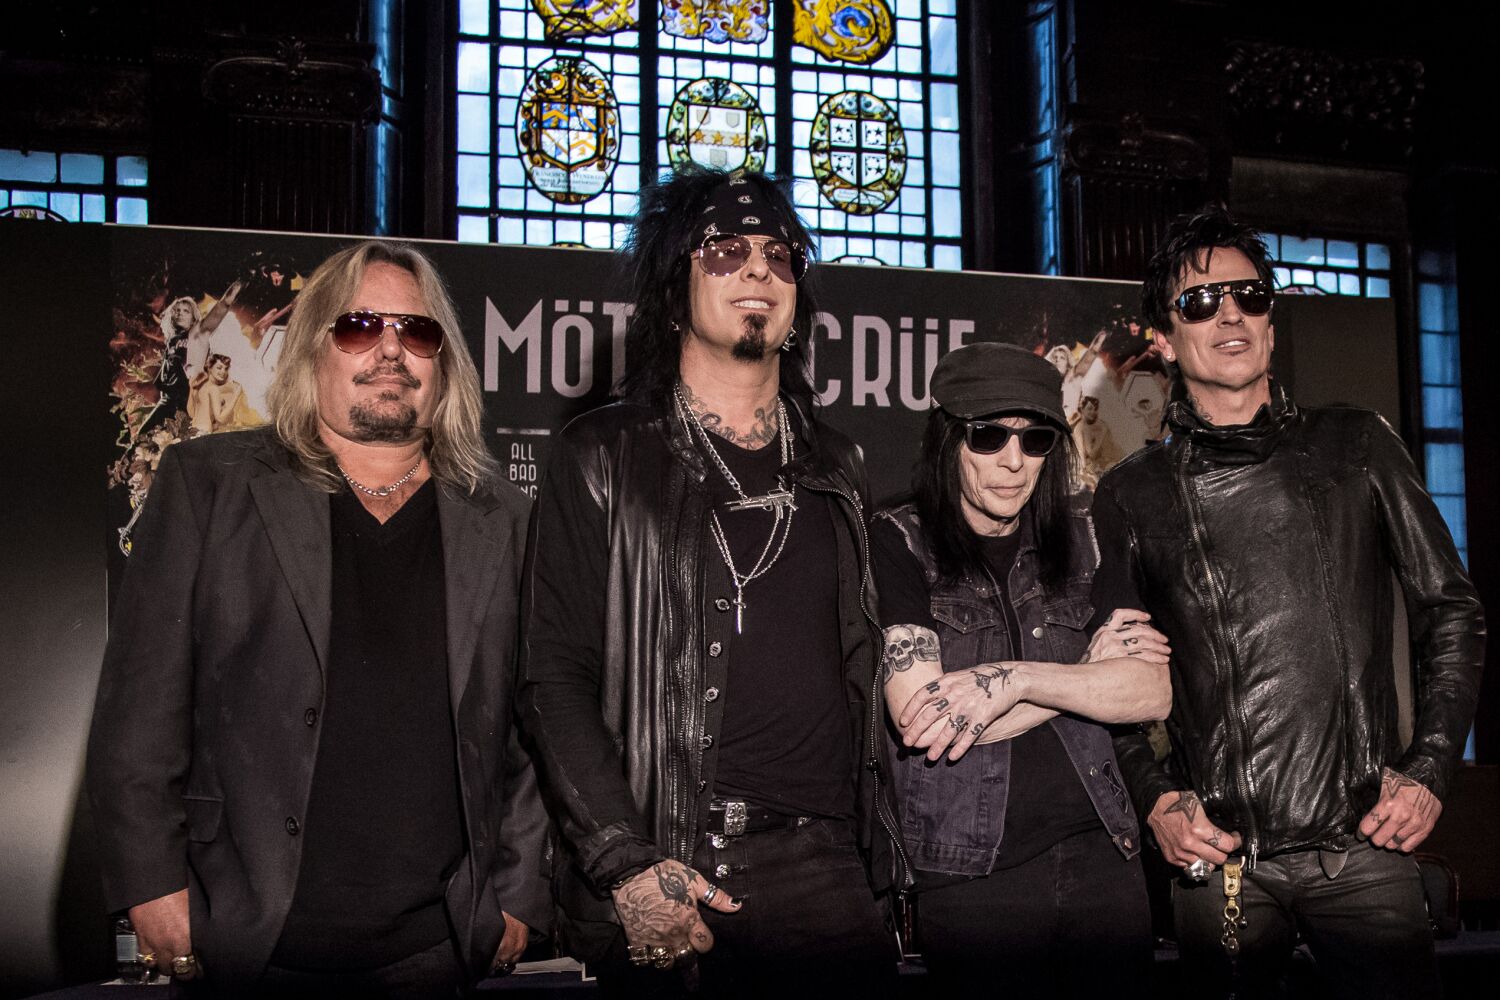 Mötley Crüe co-founder Mick Mars takes band to court: Here's what we know so far